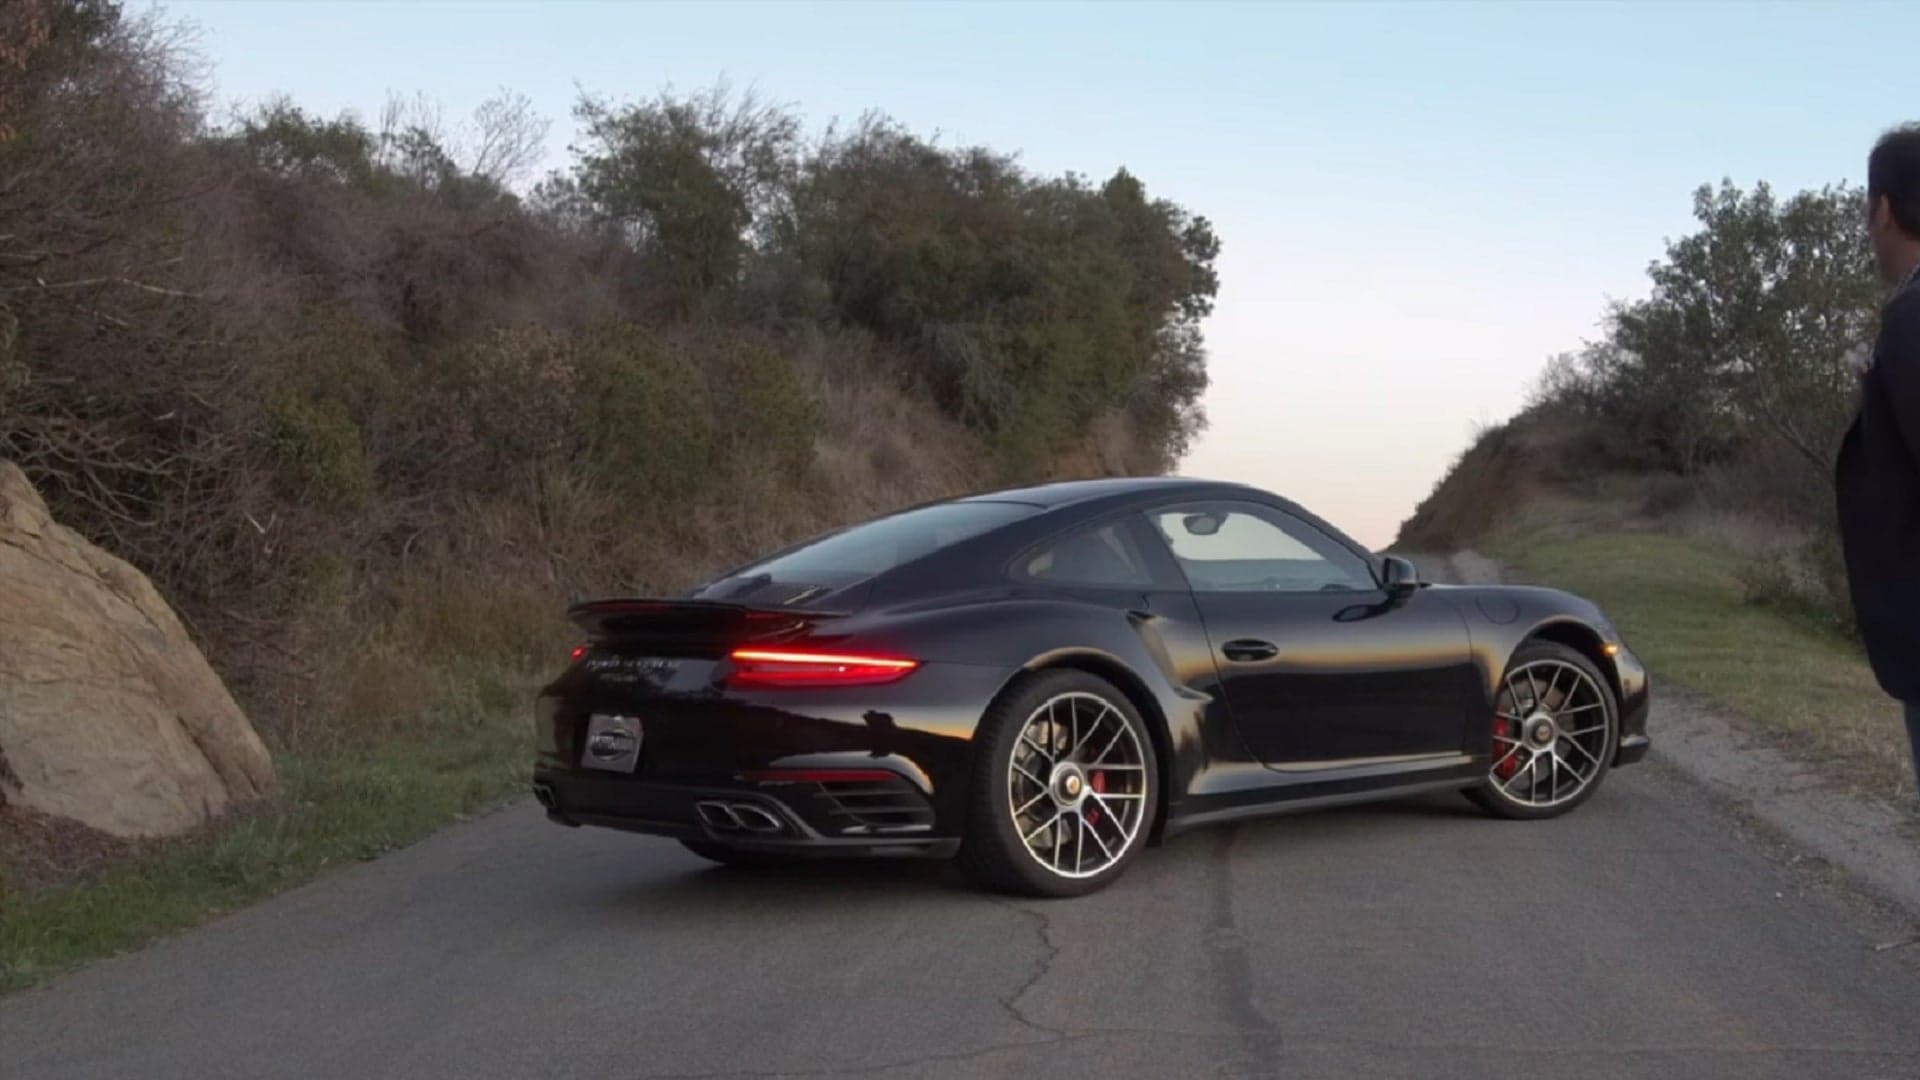 Taking A Porsche 991.2 Turbo For A Very Fast First Drive